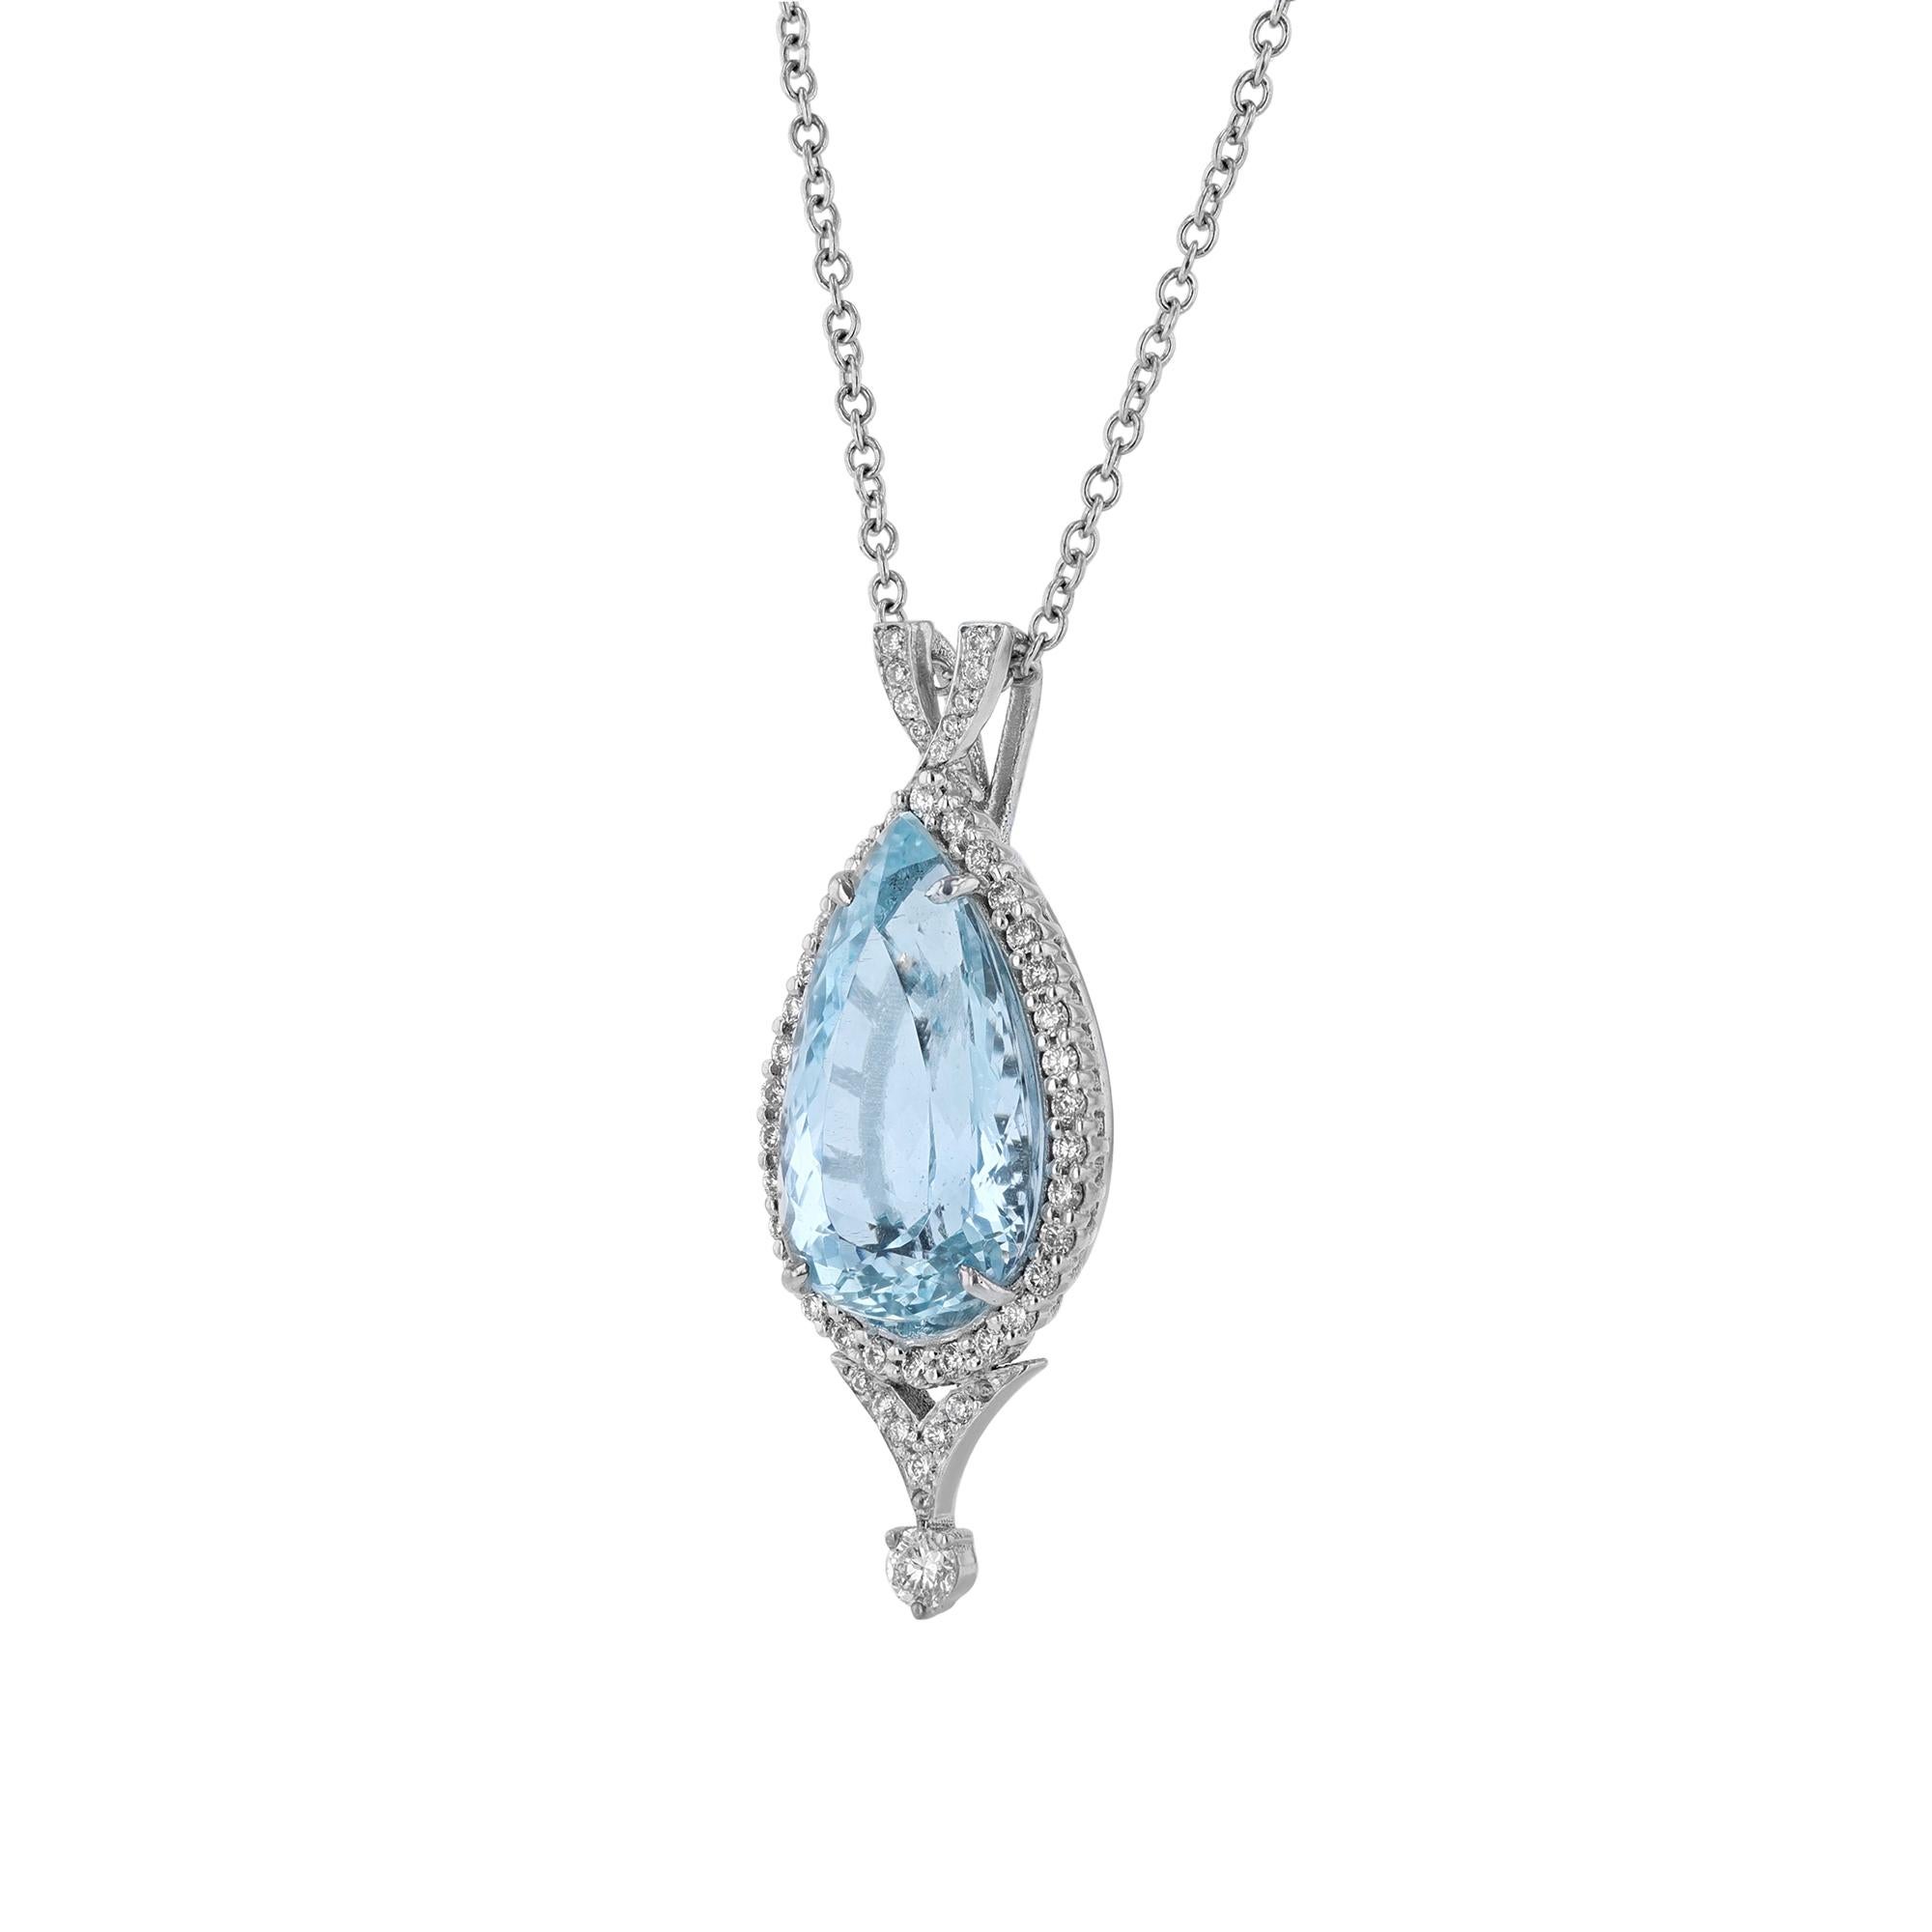 This necklace is made in 14K white gold and features a pear shaped aquamarine weighing 9.43 carats. With a halo and enhancer of 50 round cut diamonds weighing 0.62 carat.  Necklace has a color grade (H) and clarity grade (SI2). All stones are prong